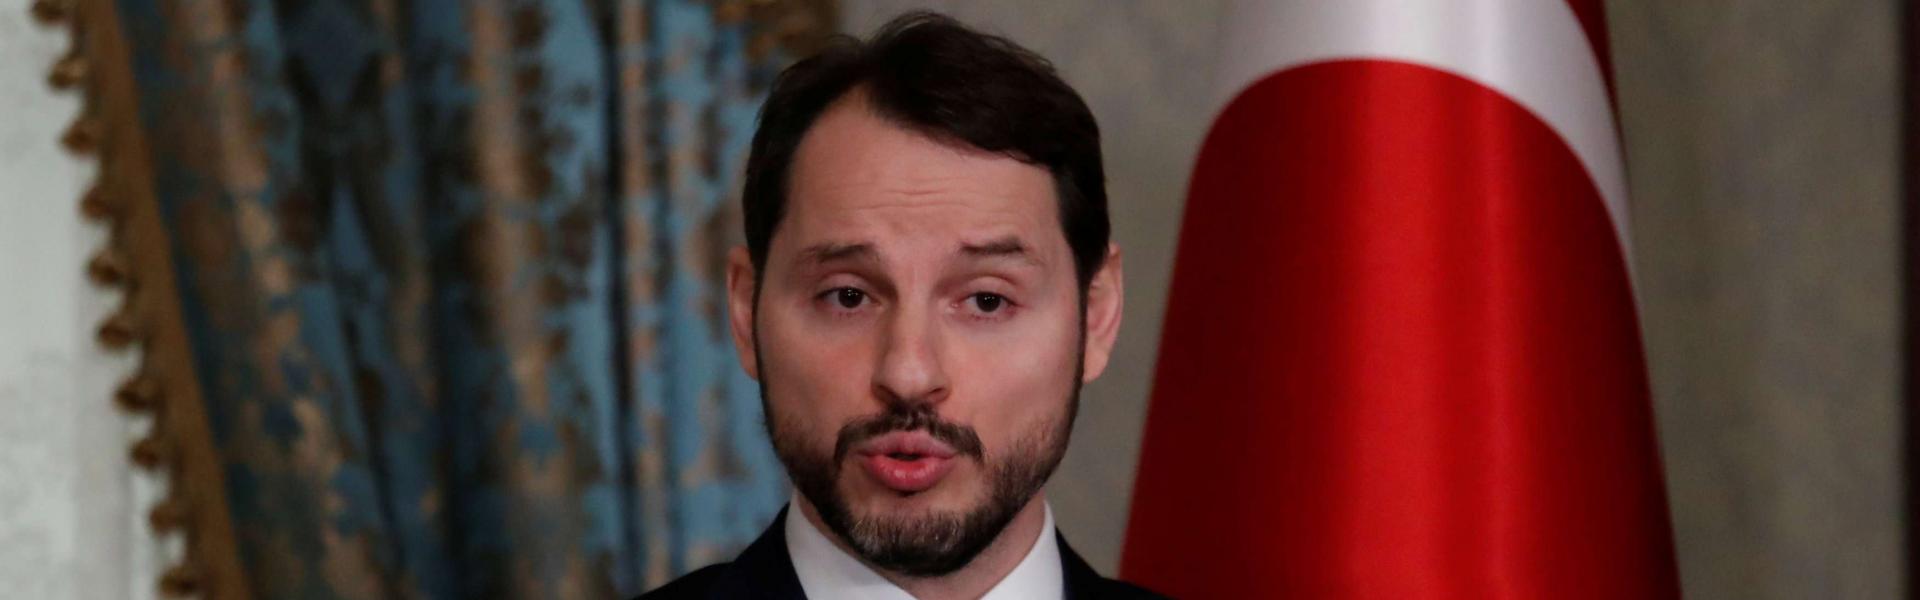 Albayrak departs from reality with predictions on Turkish economy 1